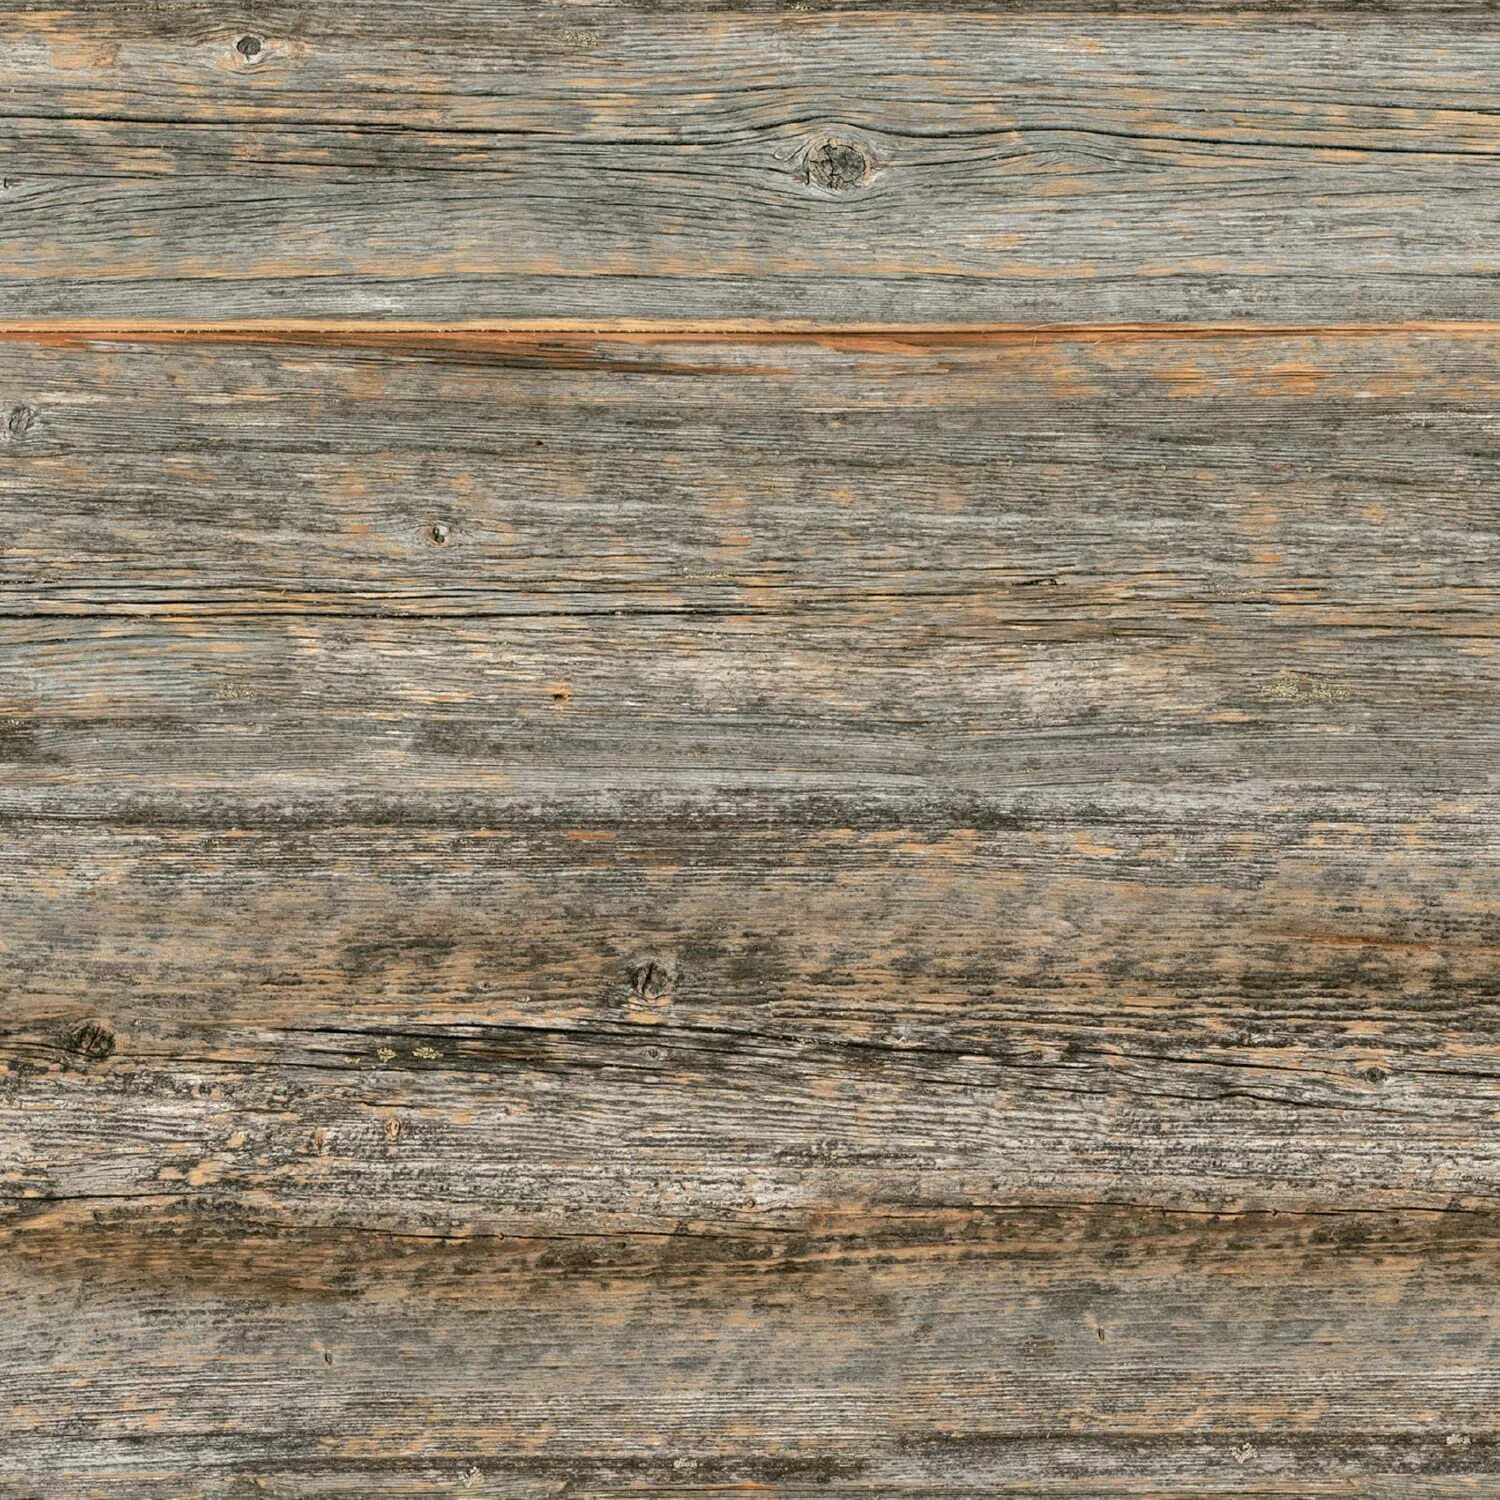 Painted Pine 8124 столешница Слотекс. Rustic Pine 8096. Столешница Слотекс 8078 Barn Wood. Слотекс сосна столешницы.